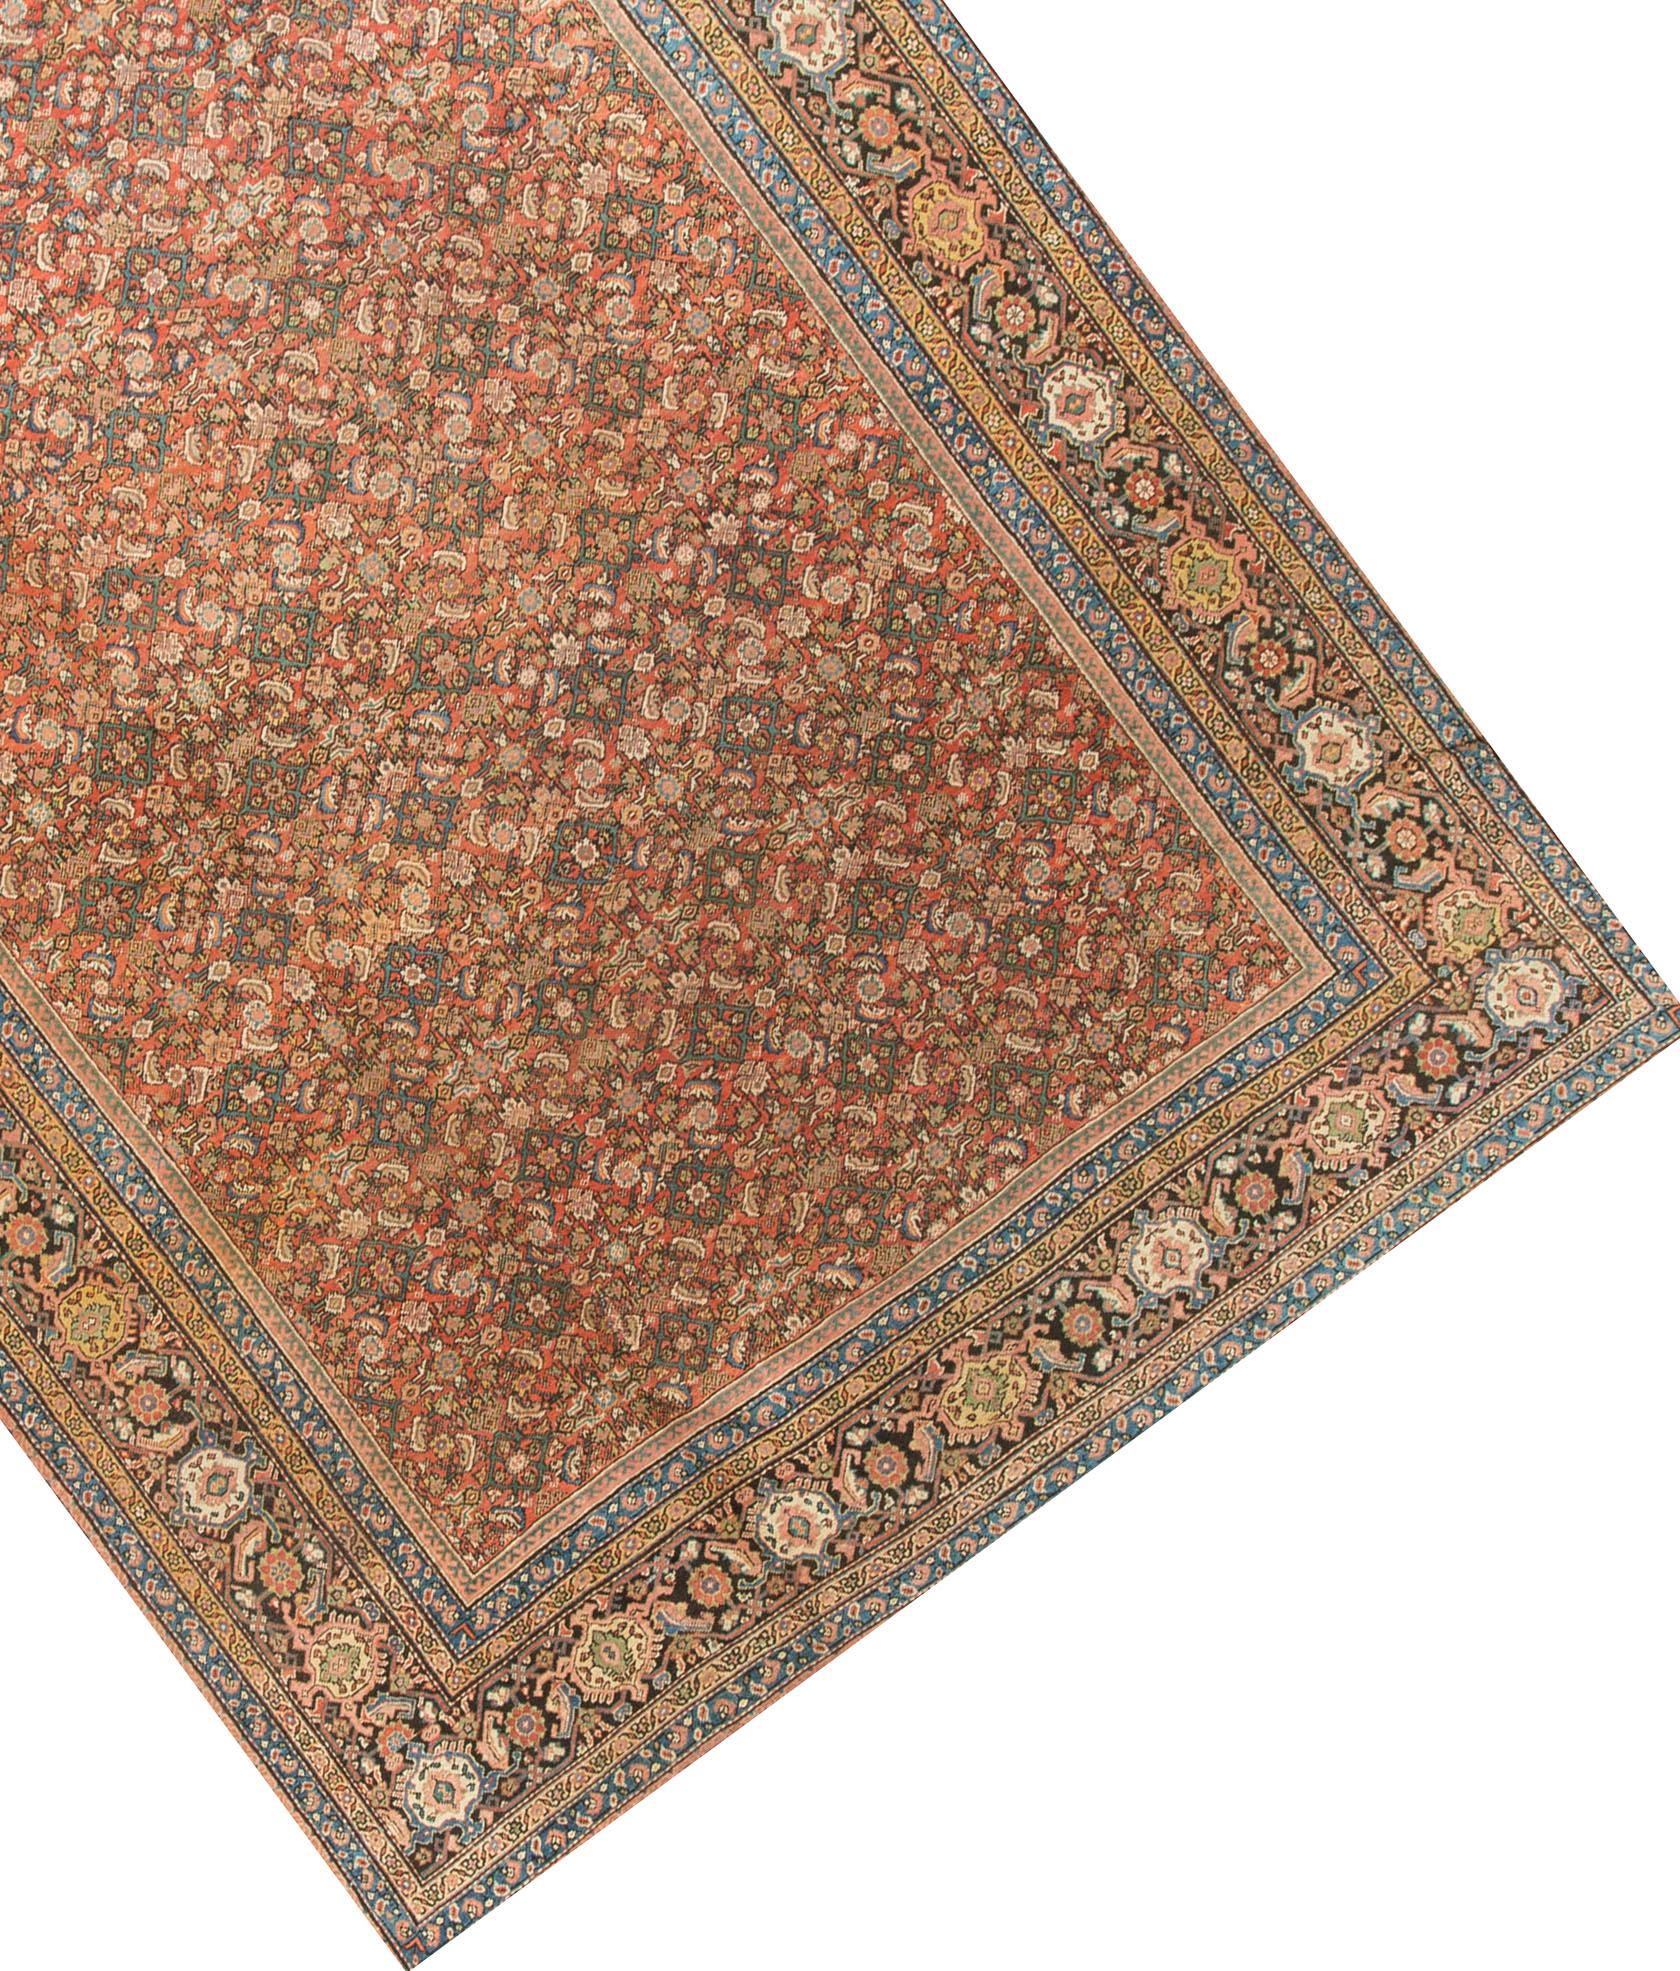 An antique Sultanabad rug with an all-over design on a red ground. The main border filled with beautiful flower heads surrounded by multiple guard borders in yellows light blues and rose.